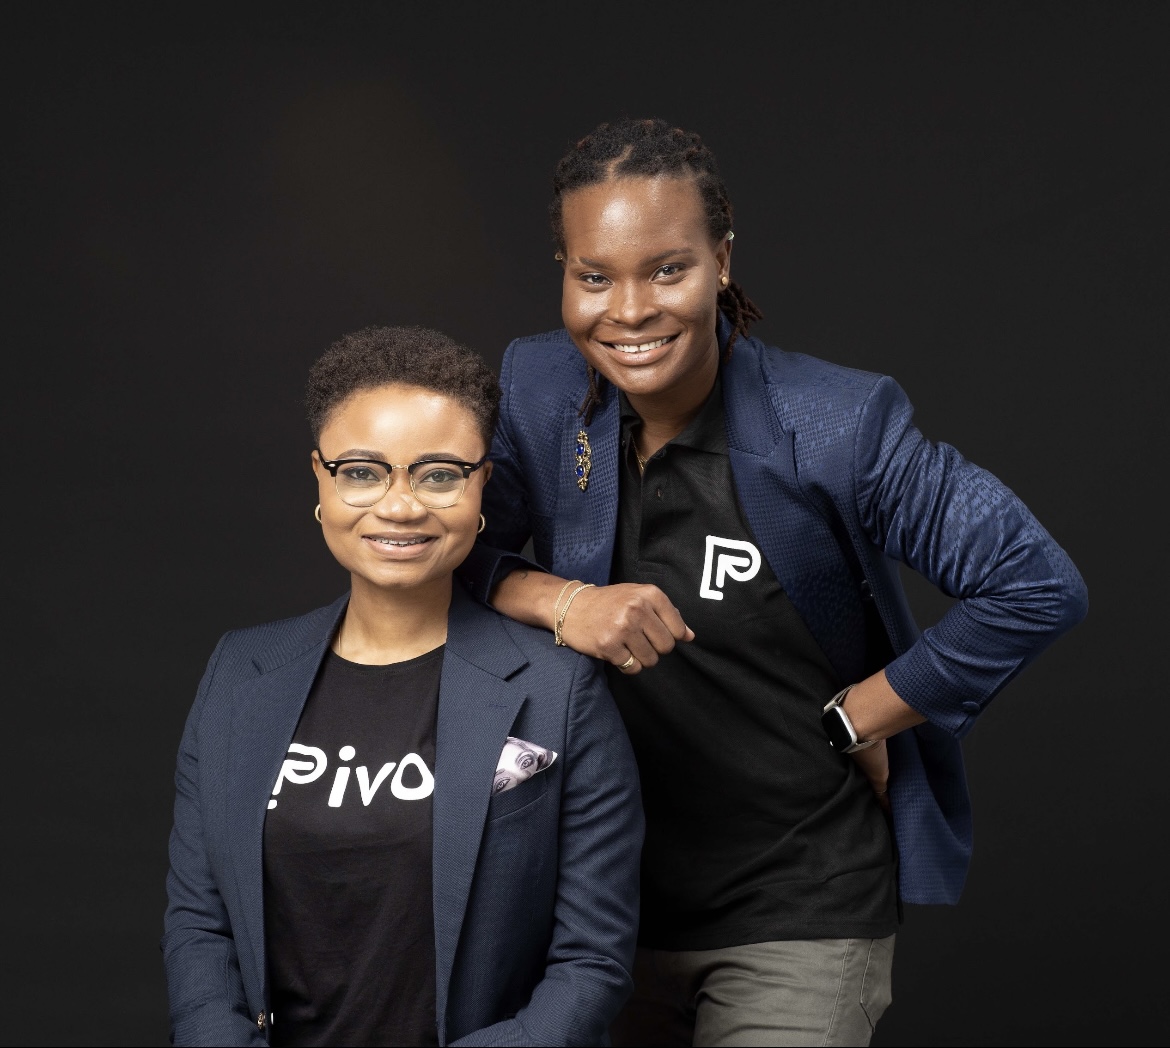 Pivo powers up Nigerian freight carriers with a bespoke digital bank, gets $2M seed funding